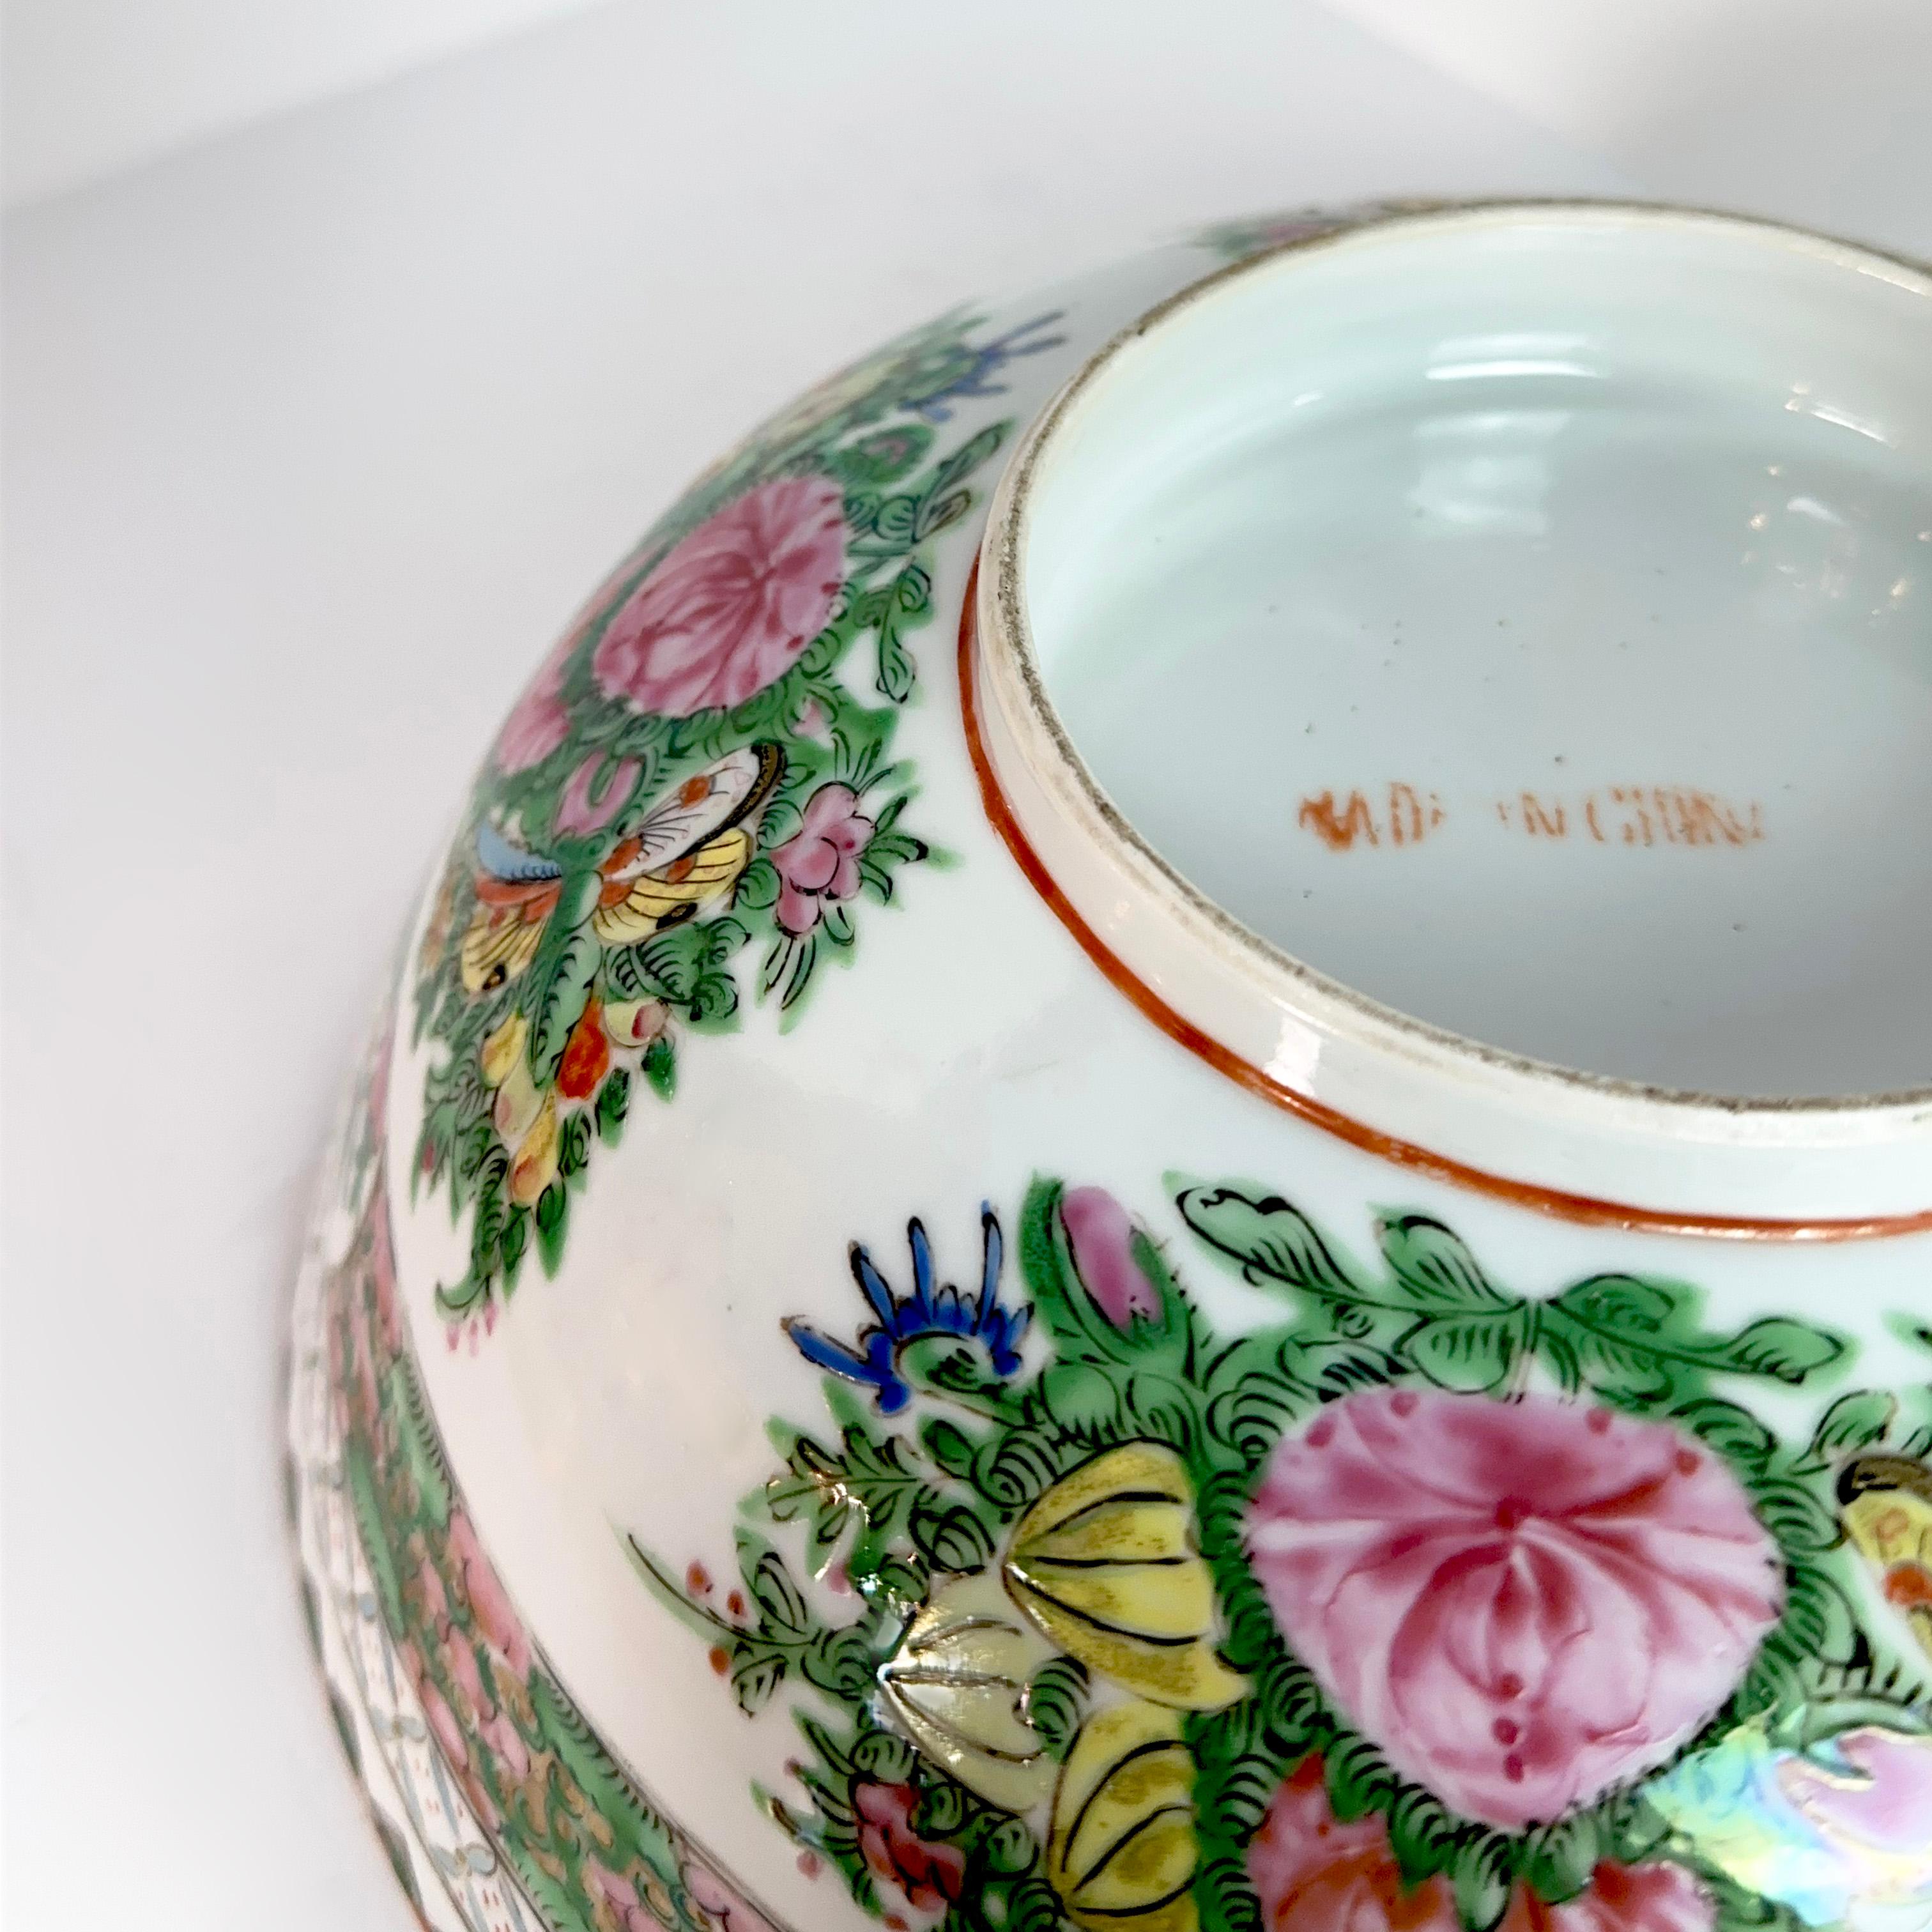 This splendid Chinese porcelain piece, adorned in the vibrant Rose Medallion style, is a large Rose Medallion Canton bowl that will make you embrace the allure of history. The hand-painted enamel finish showcases an intricate scene teeming with lush